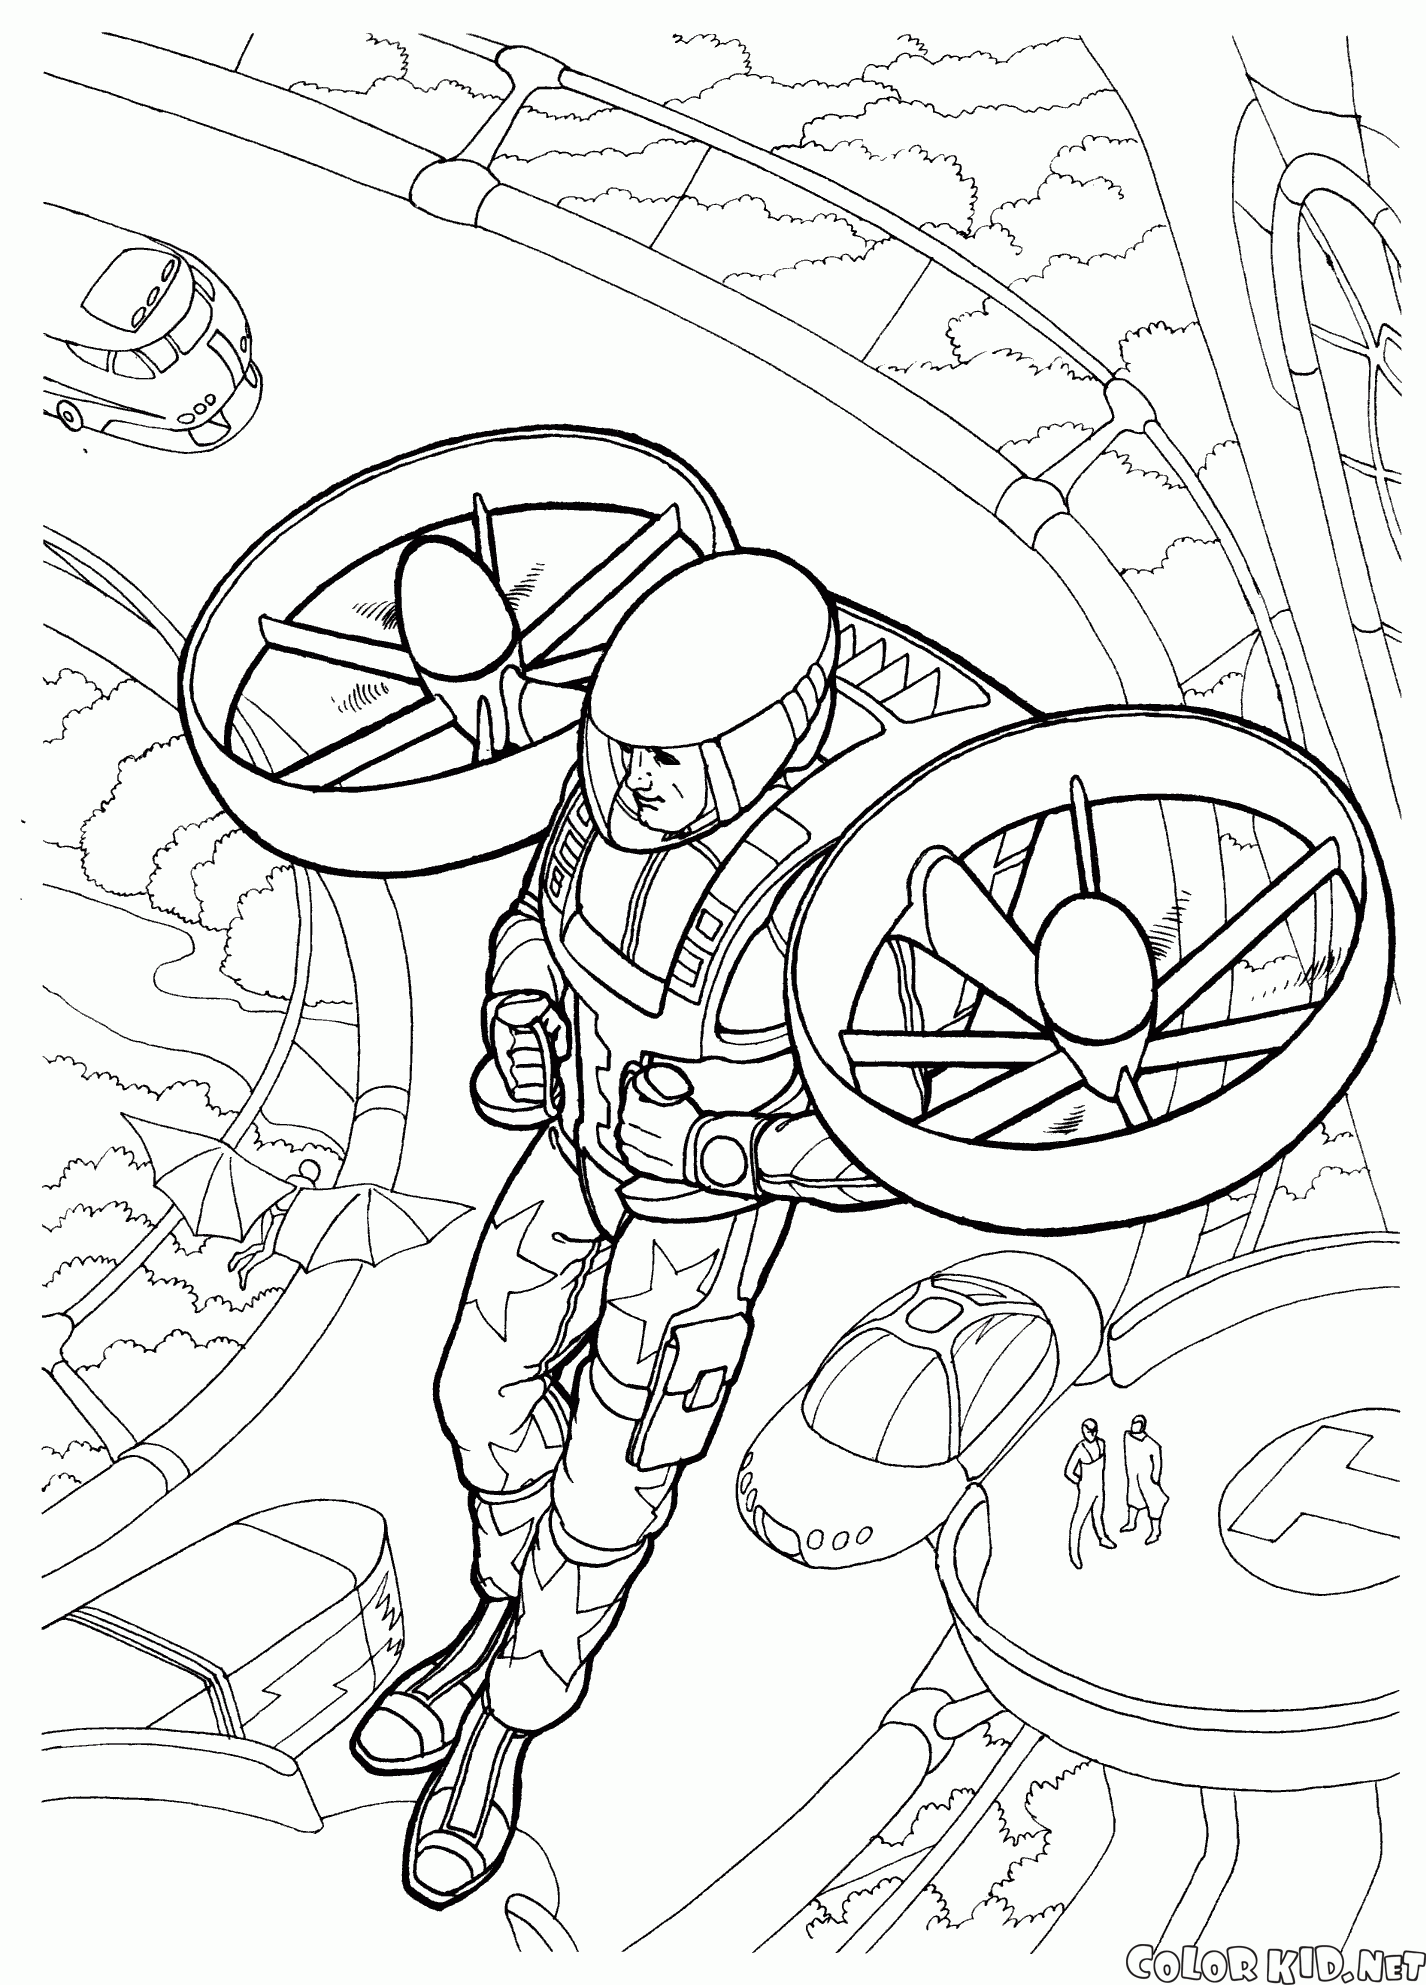 Coloring page - Walking police equipment